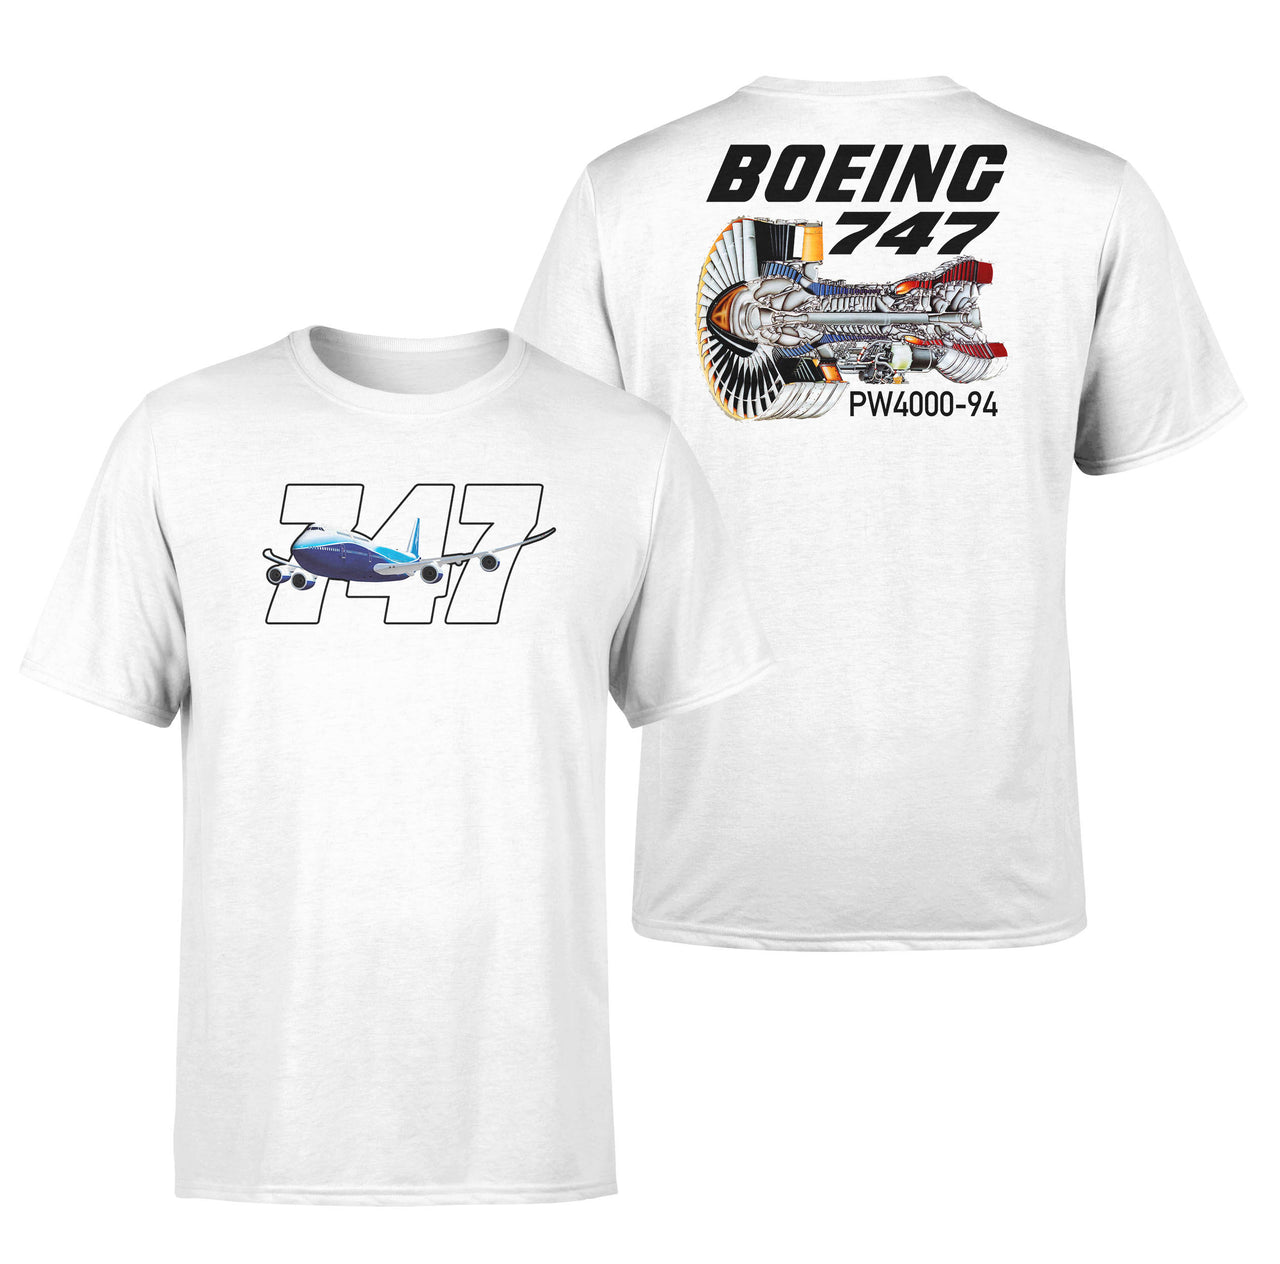 Boeing 747 & PW4000-94 Engine Designed Double-Side T-Shirts